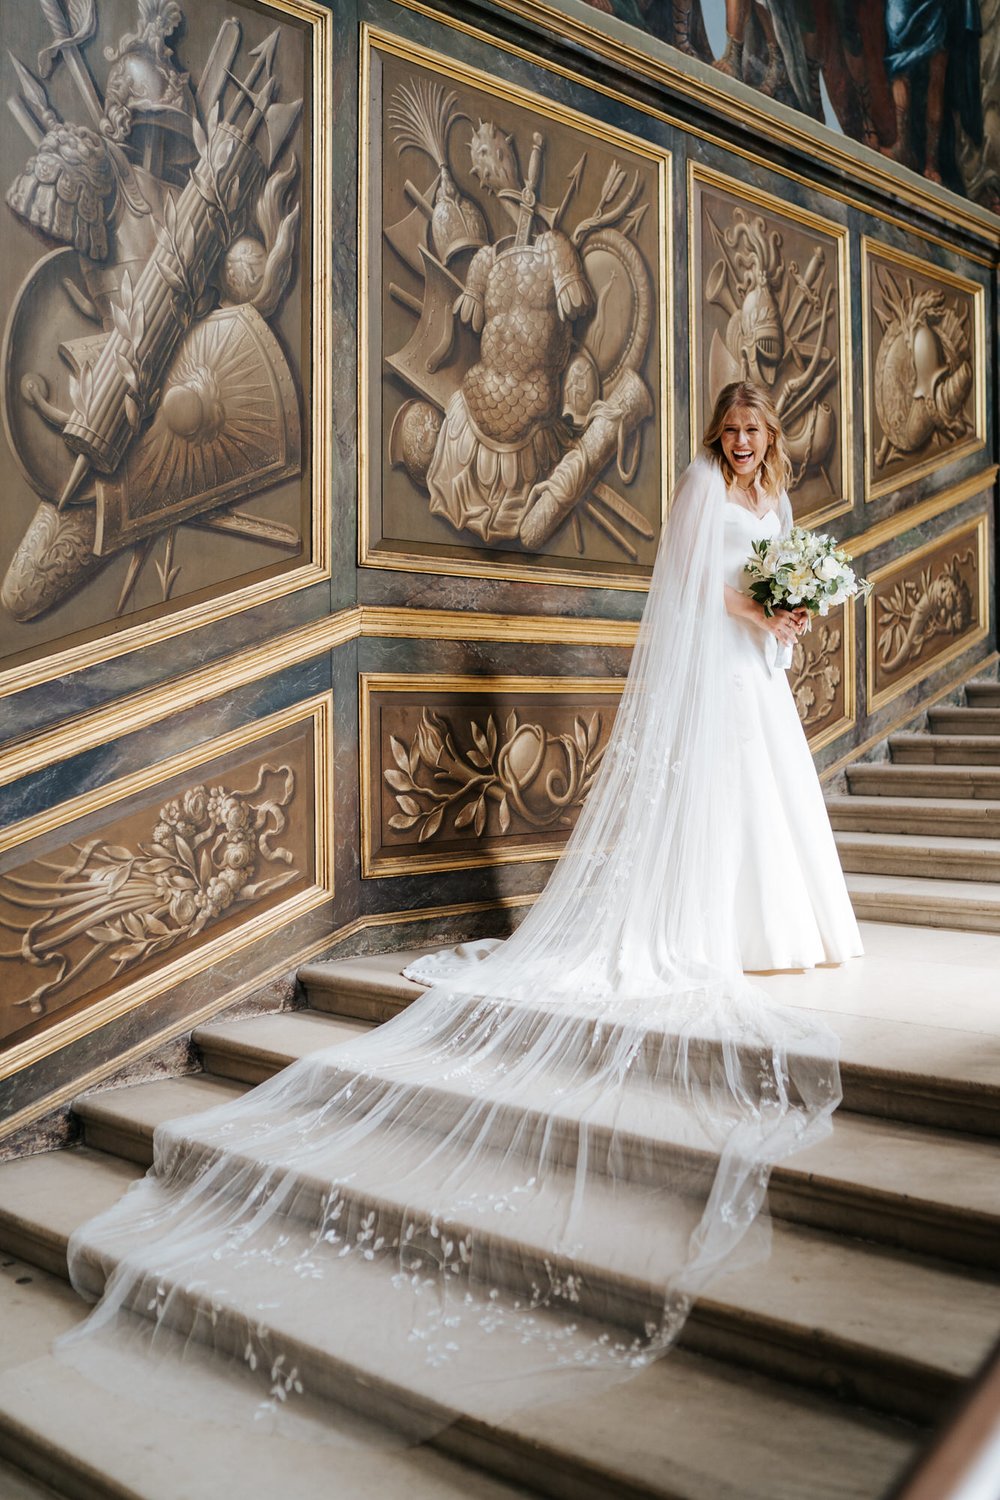 Bride cannot contain her joy and excitement as she stands in grand staircase at Hampton Court Palace while her veil flows behind her